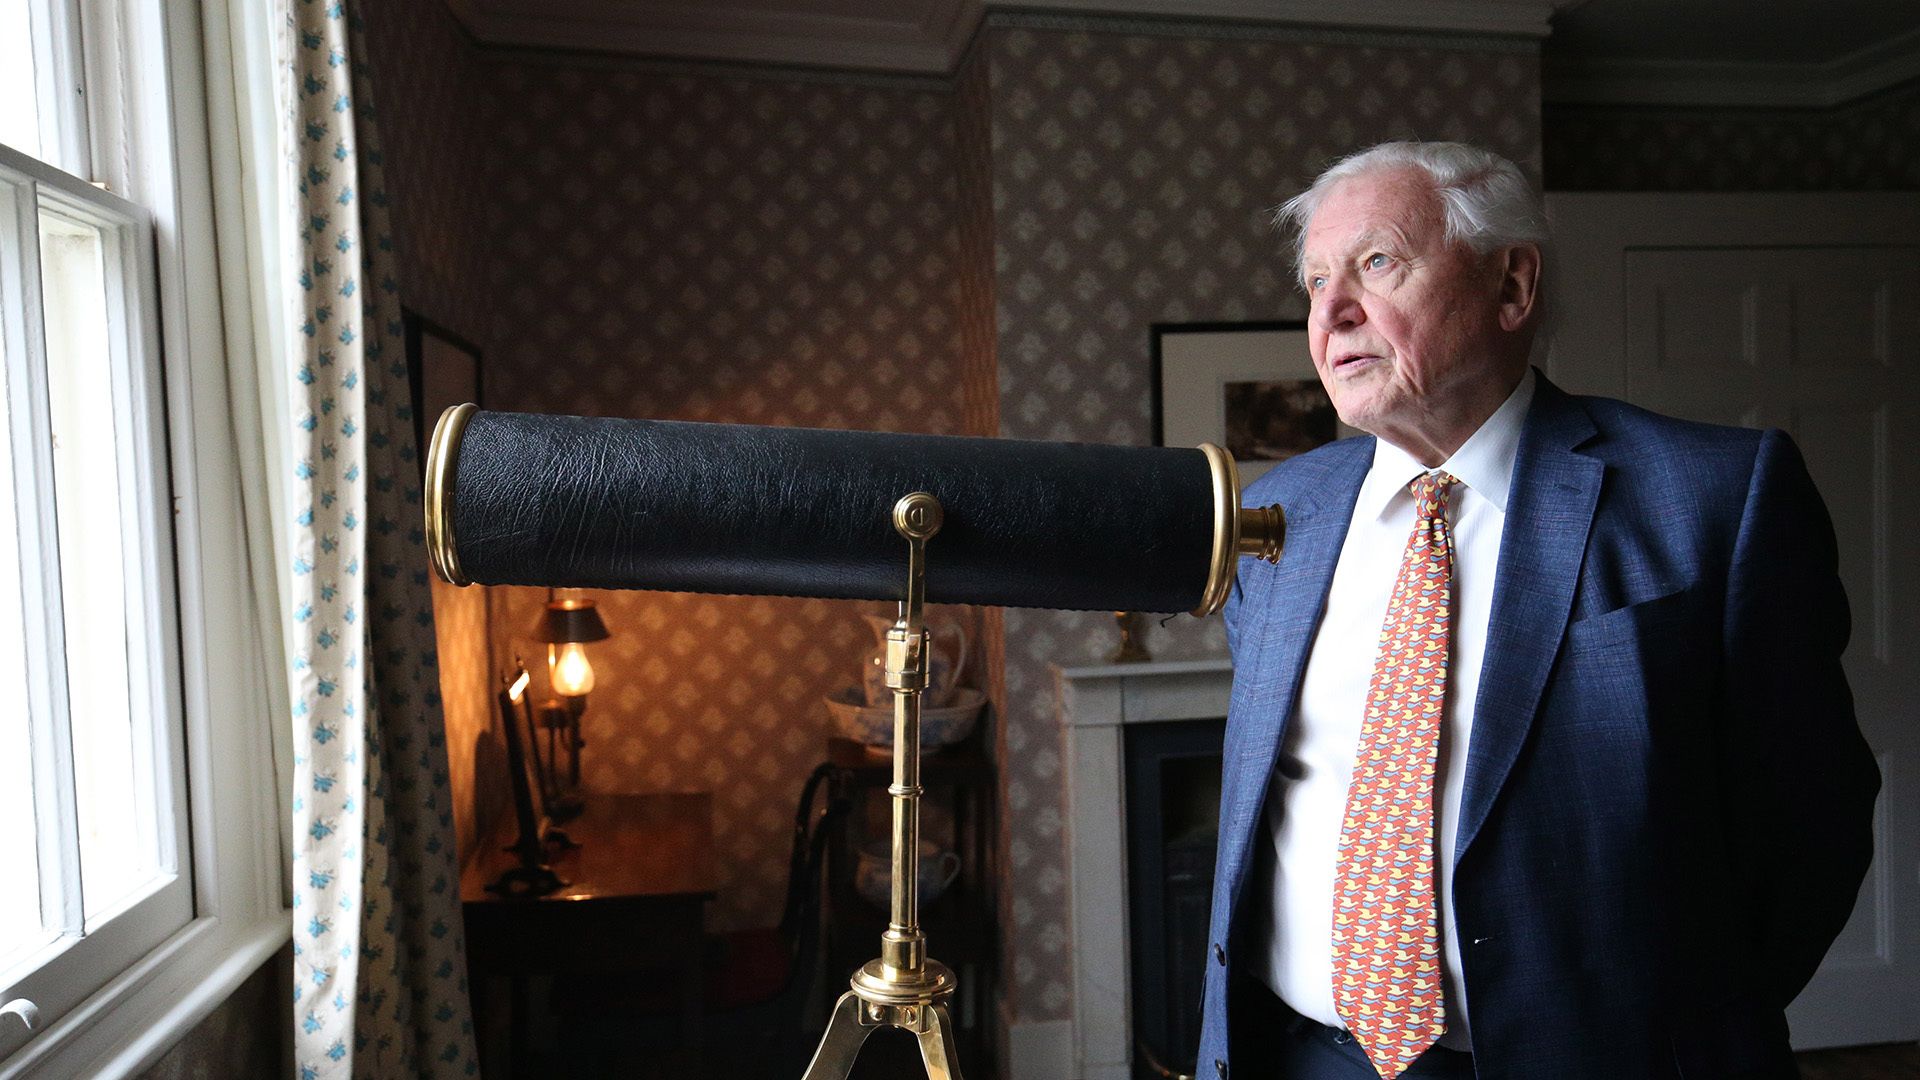 David Attenborough's new book and Netflix film tackles climate crisis with a 'vision for the future'